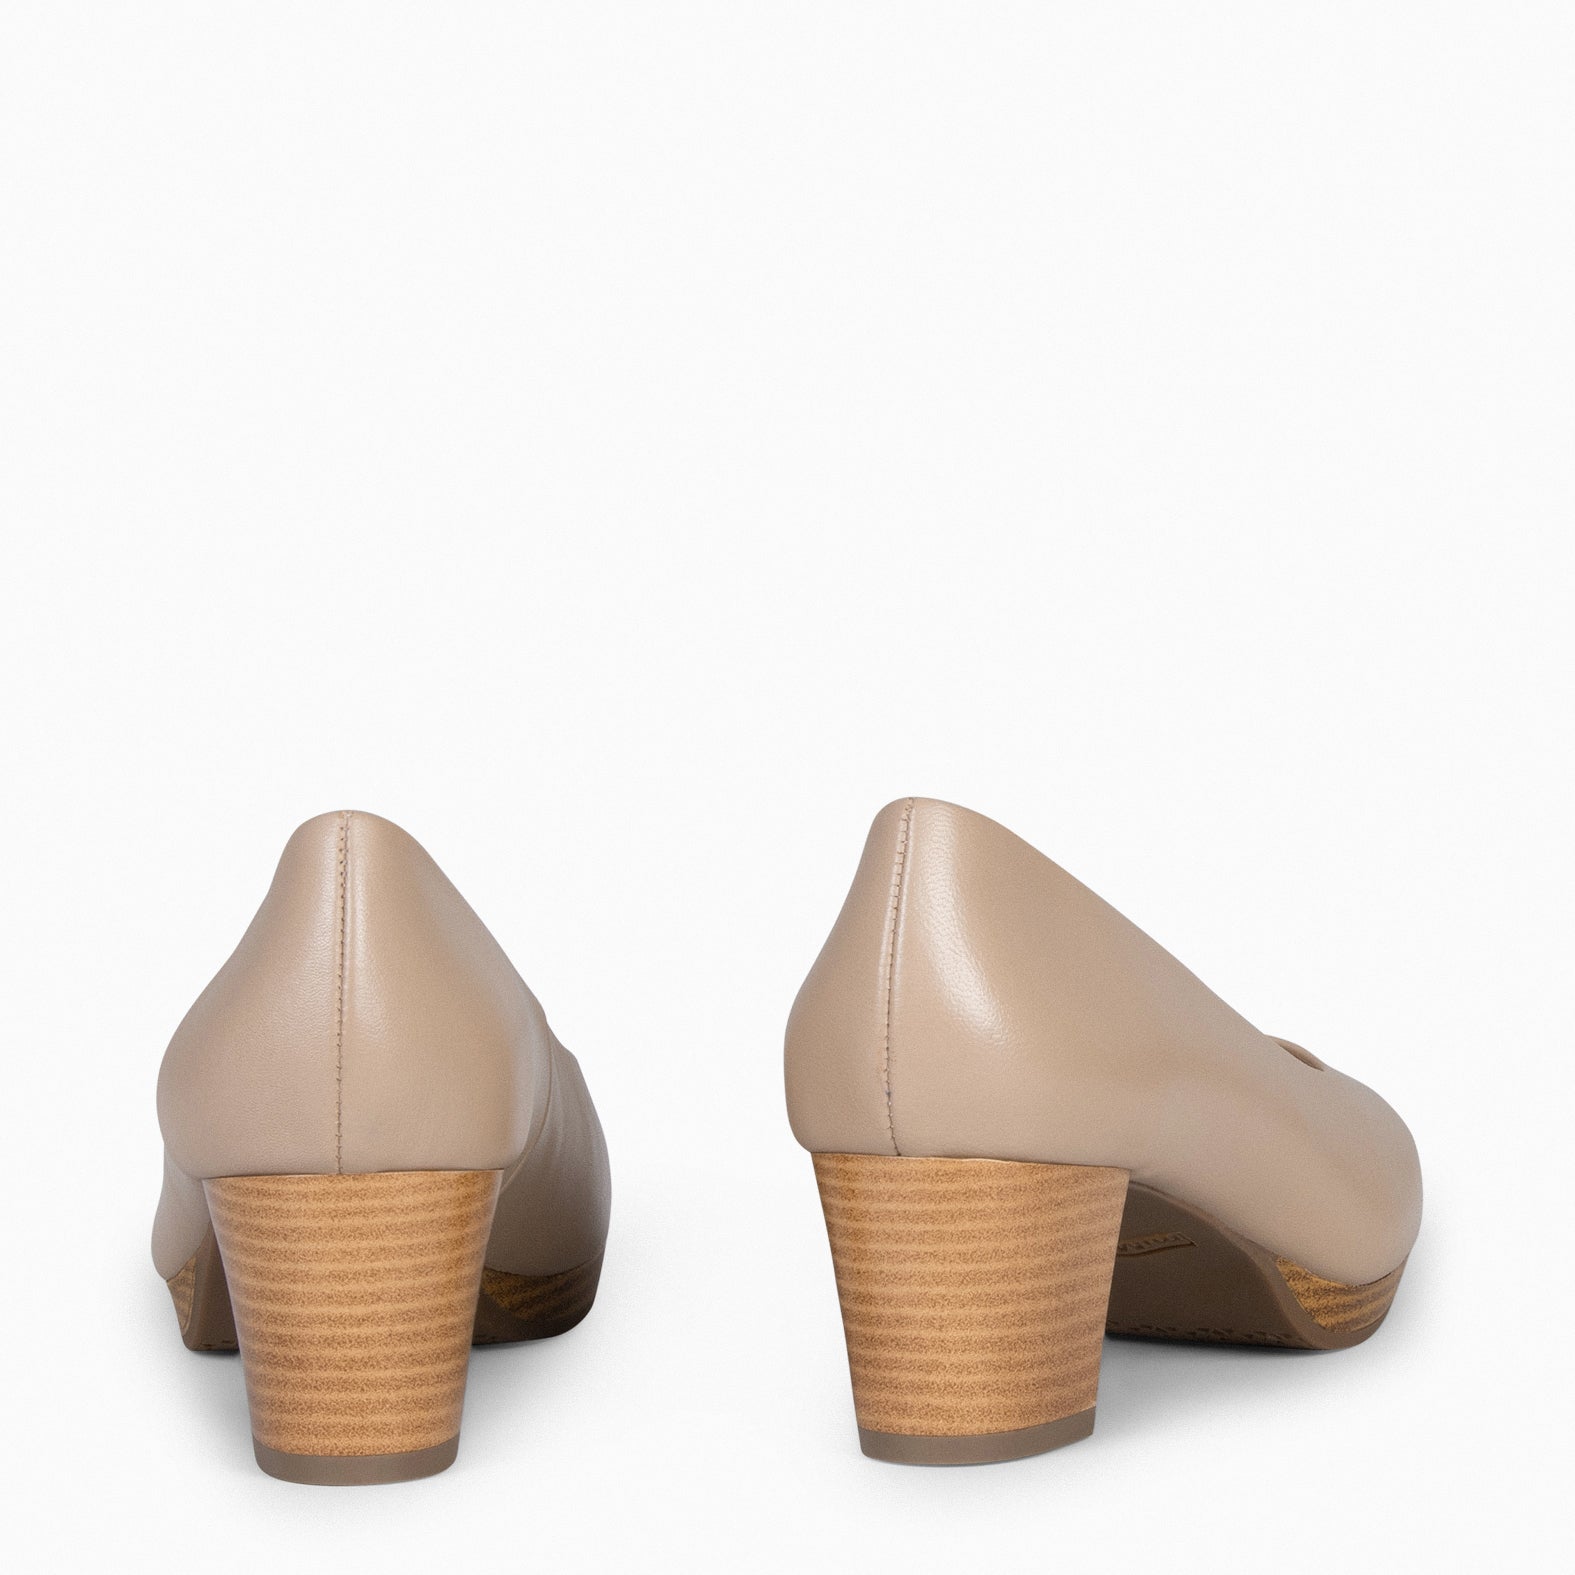 FLIGHT S – TAUPE shoes with low heel and platform